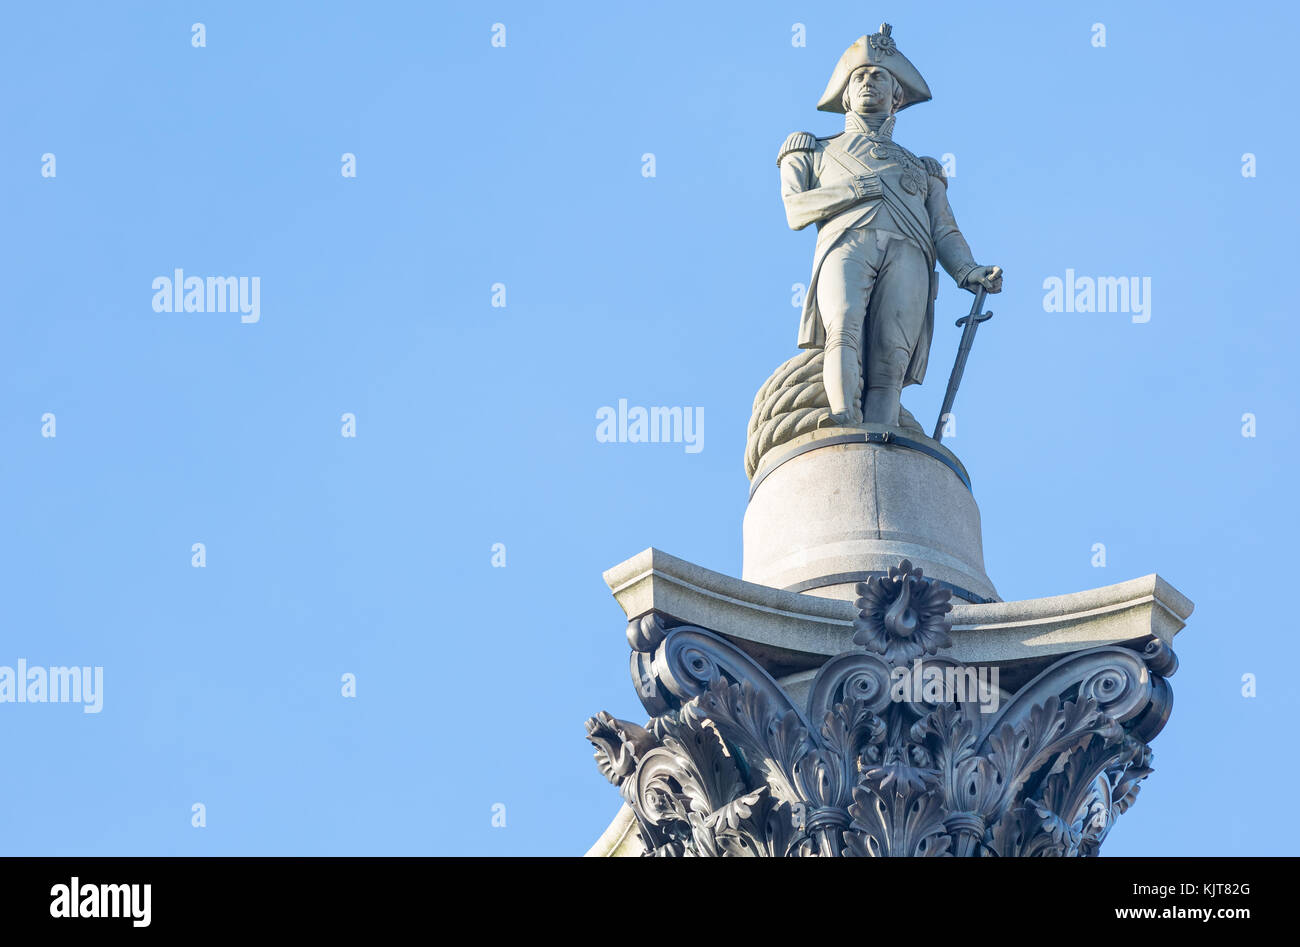 The famous statue of Admiral Nelson on Trafalgar Square in London, UK, on blue clear sky Stock Photo